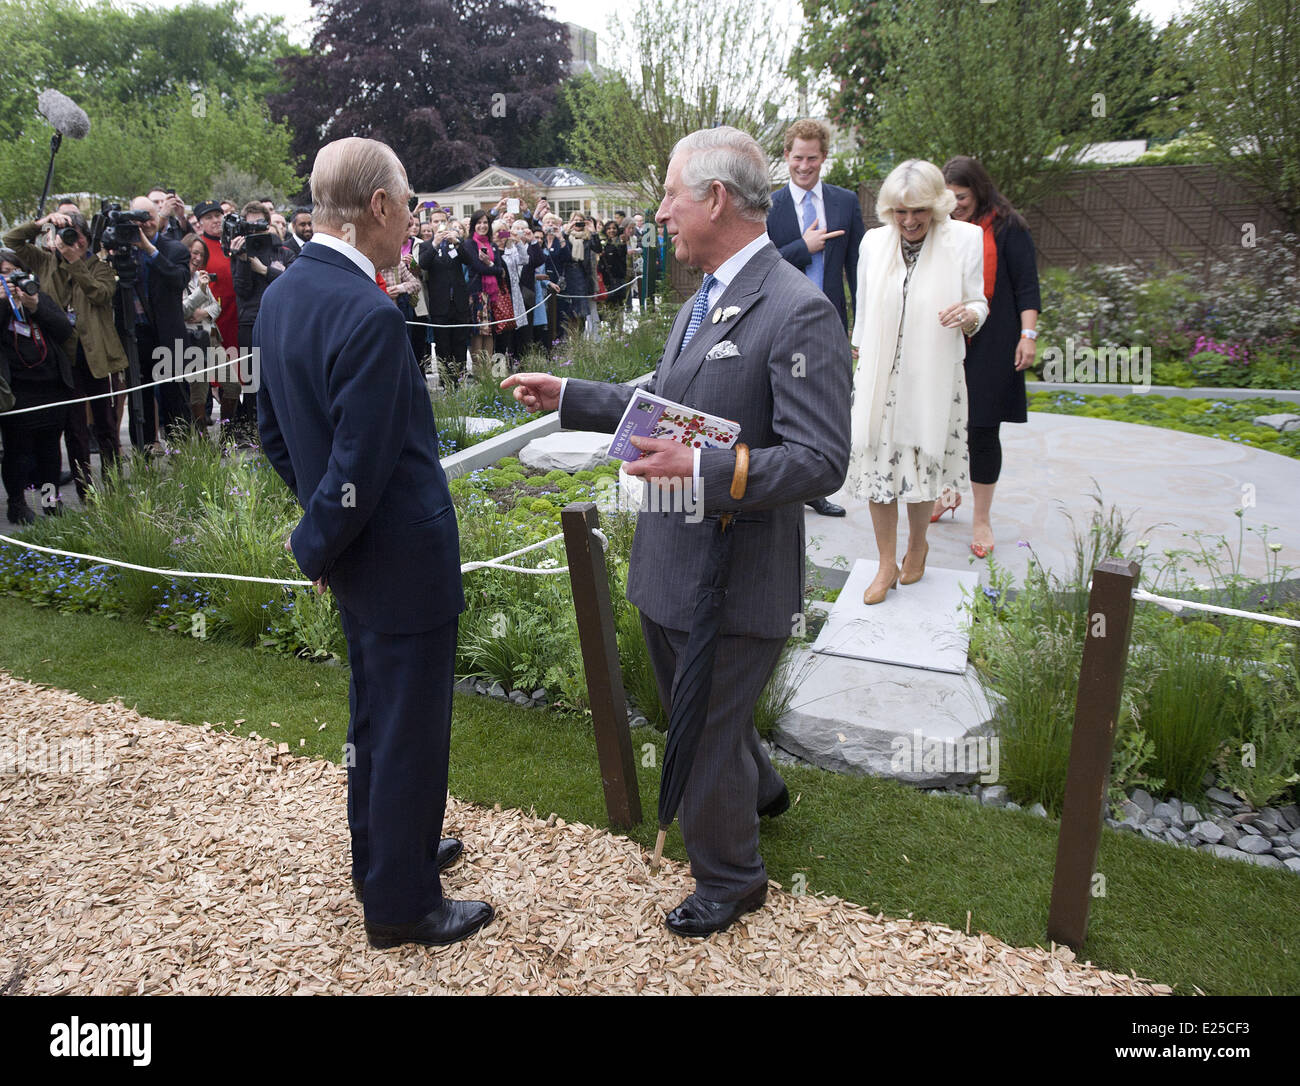 LONDON - UK - 20 MAY 2013: ROTA: Chelsea Flower Show 2013. Members of the Royal Family join HM Queen Elizabeth for a walk around the annual Chelsea Flower Show.  Prince Harry show his garden to his father Prince Charles Royal Rota photograph by Geoff Pugh/Supplied by Ian Jones Photography. NO Uk Sales for 28 days until 18-6-2013  Featuring: Camilla,Duchess of Cornwall,Charles,Prince of Wales,Prince Charles,Prince Harry,Prince Philip,Duke of Edinburgh Where: London, United Kingdom When: 20 May 2013 Stock Photo